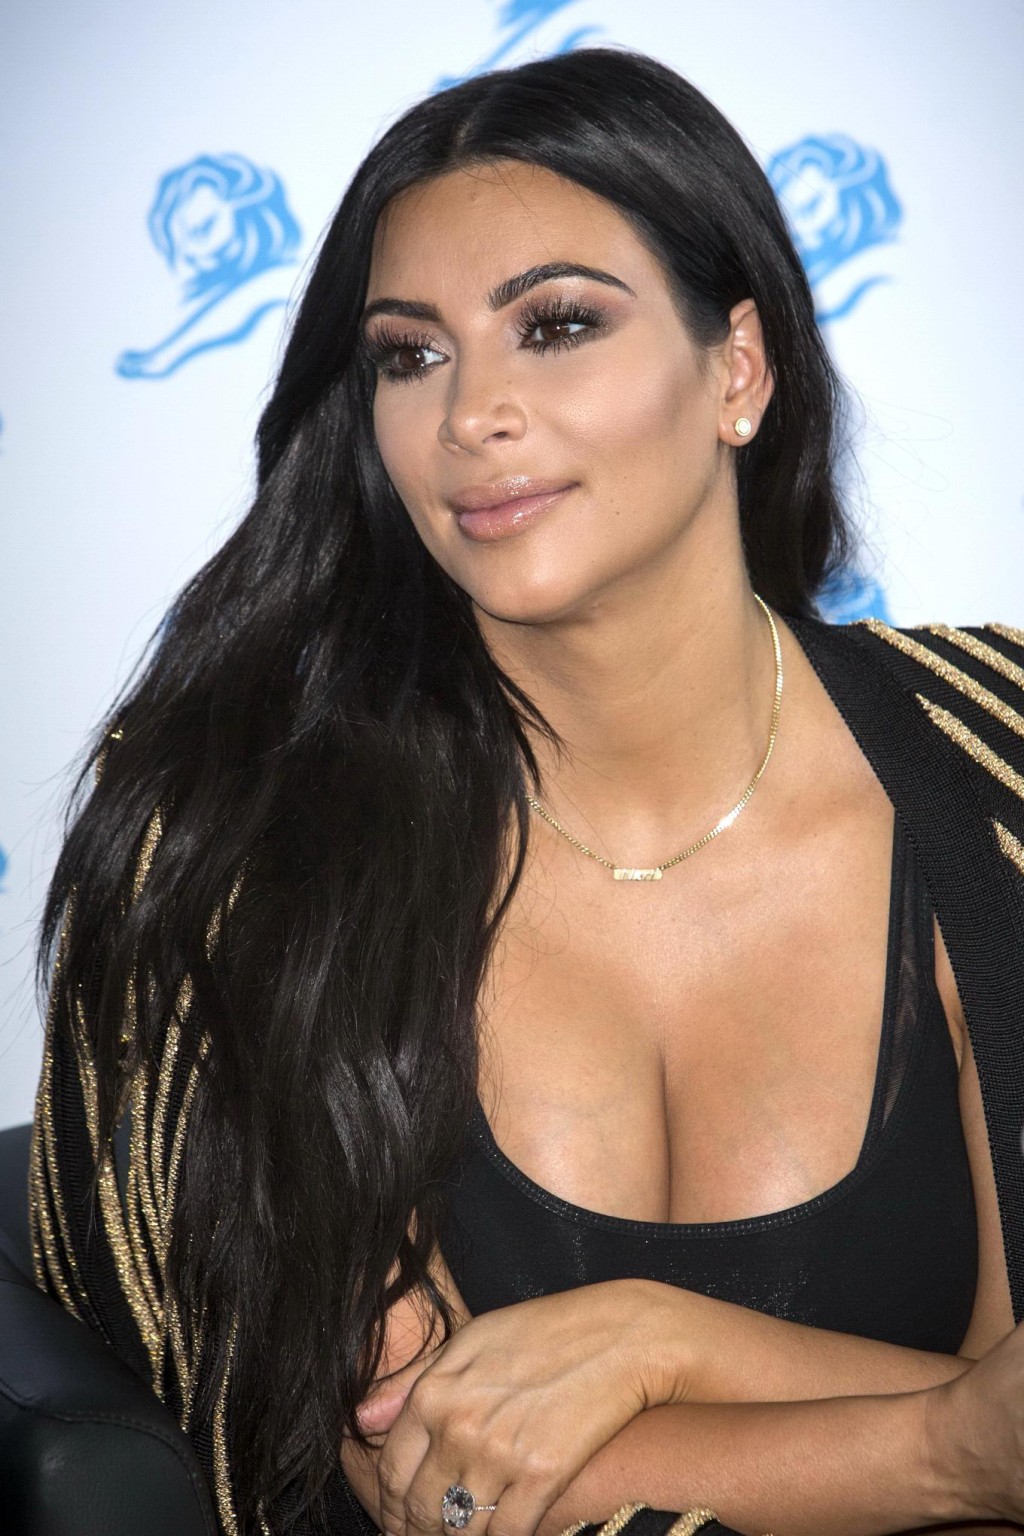 Kim Kardashian showing huge cleavage at the Cannes Lions event #75160331